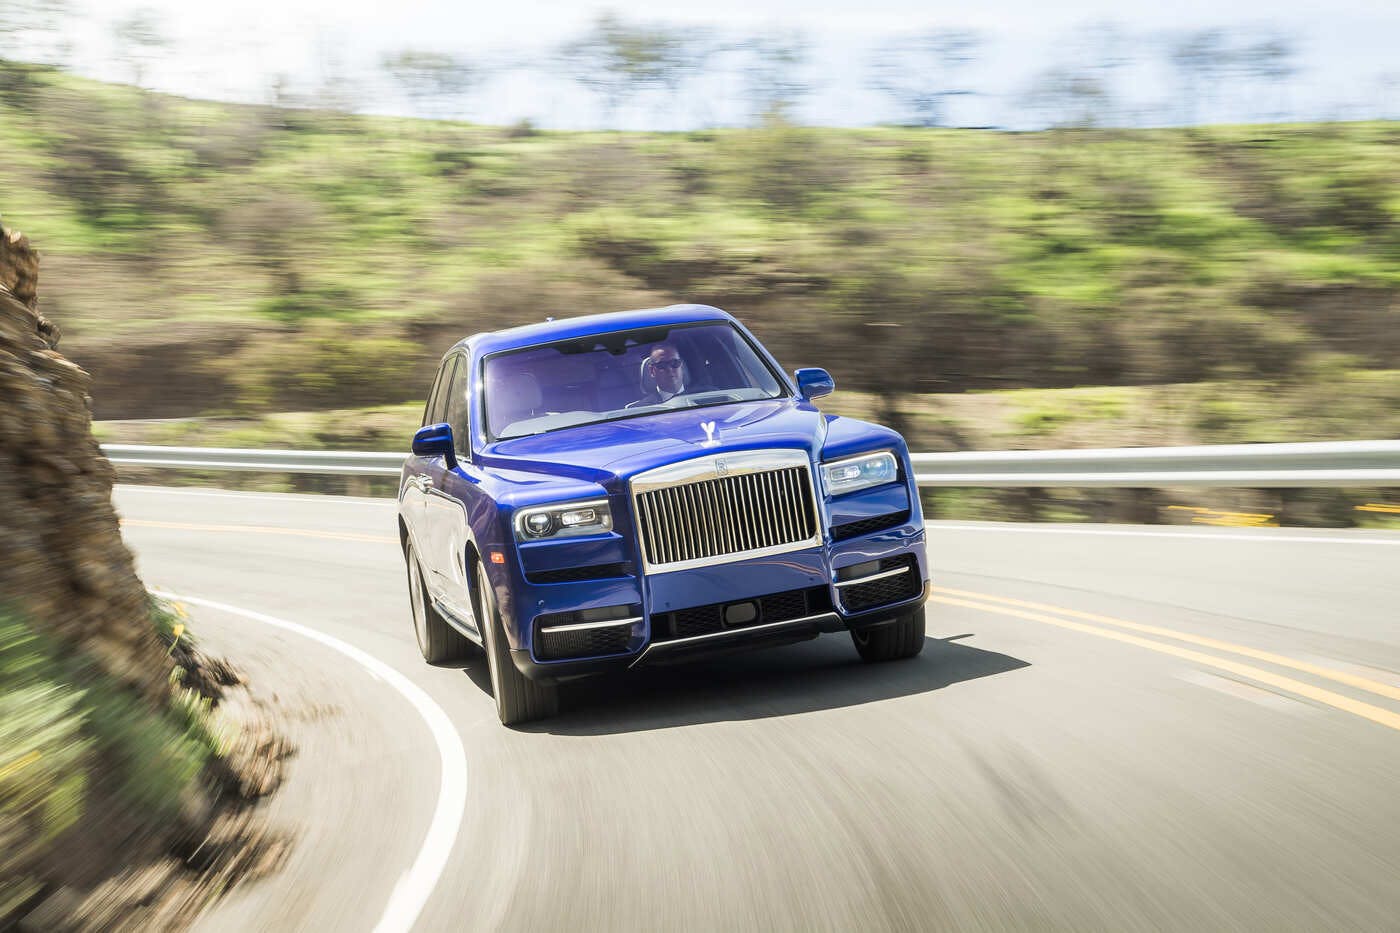 2021 Rolls-Royce Cullinan SUV Lease for $4925.0 month